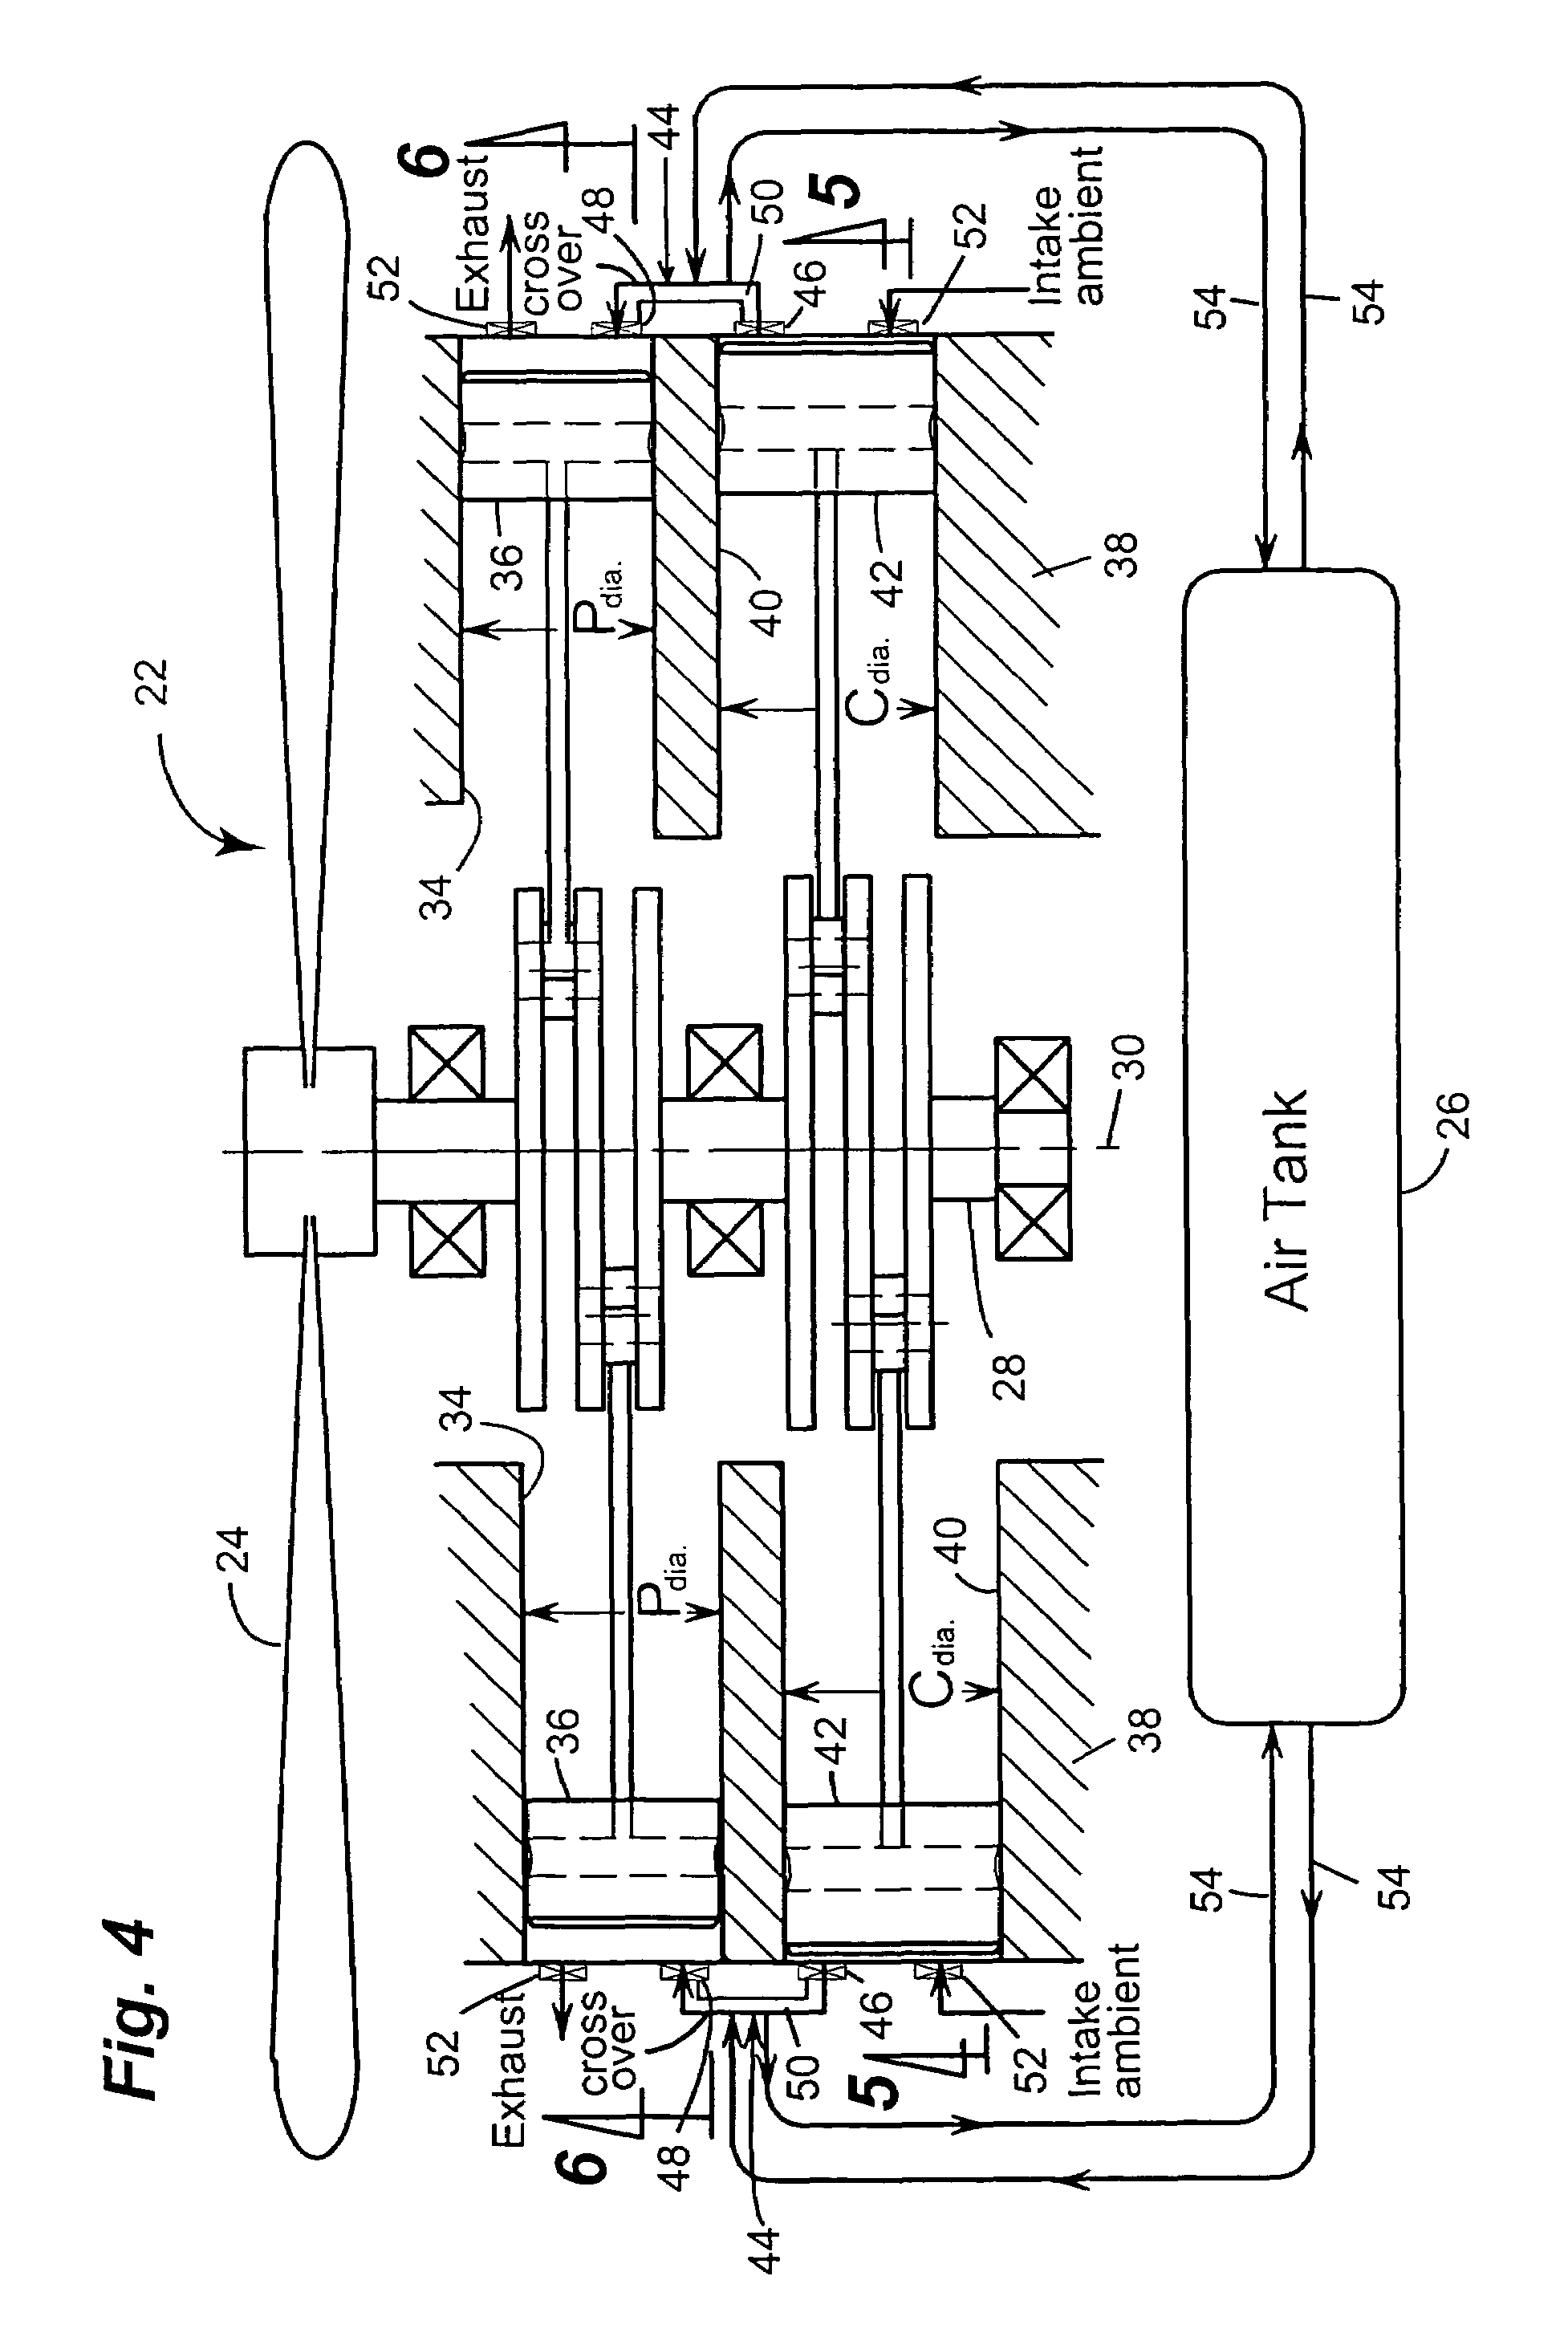 Split-cycle aircraft engine